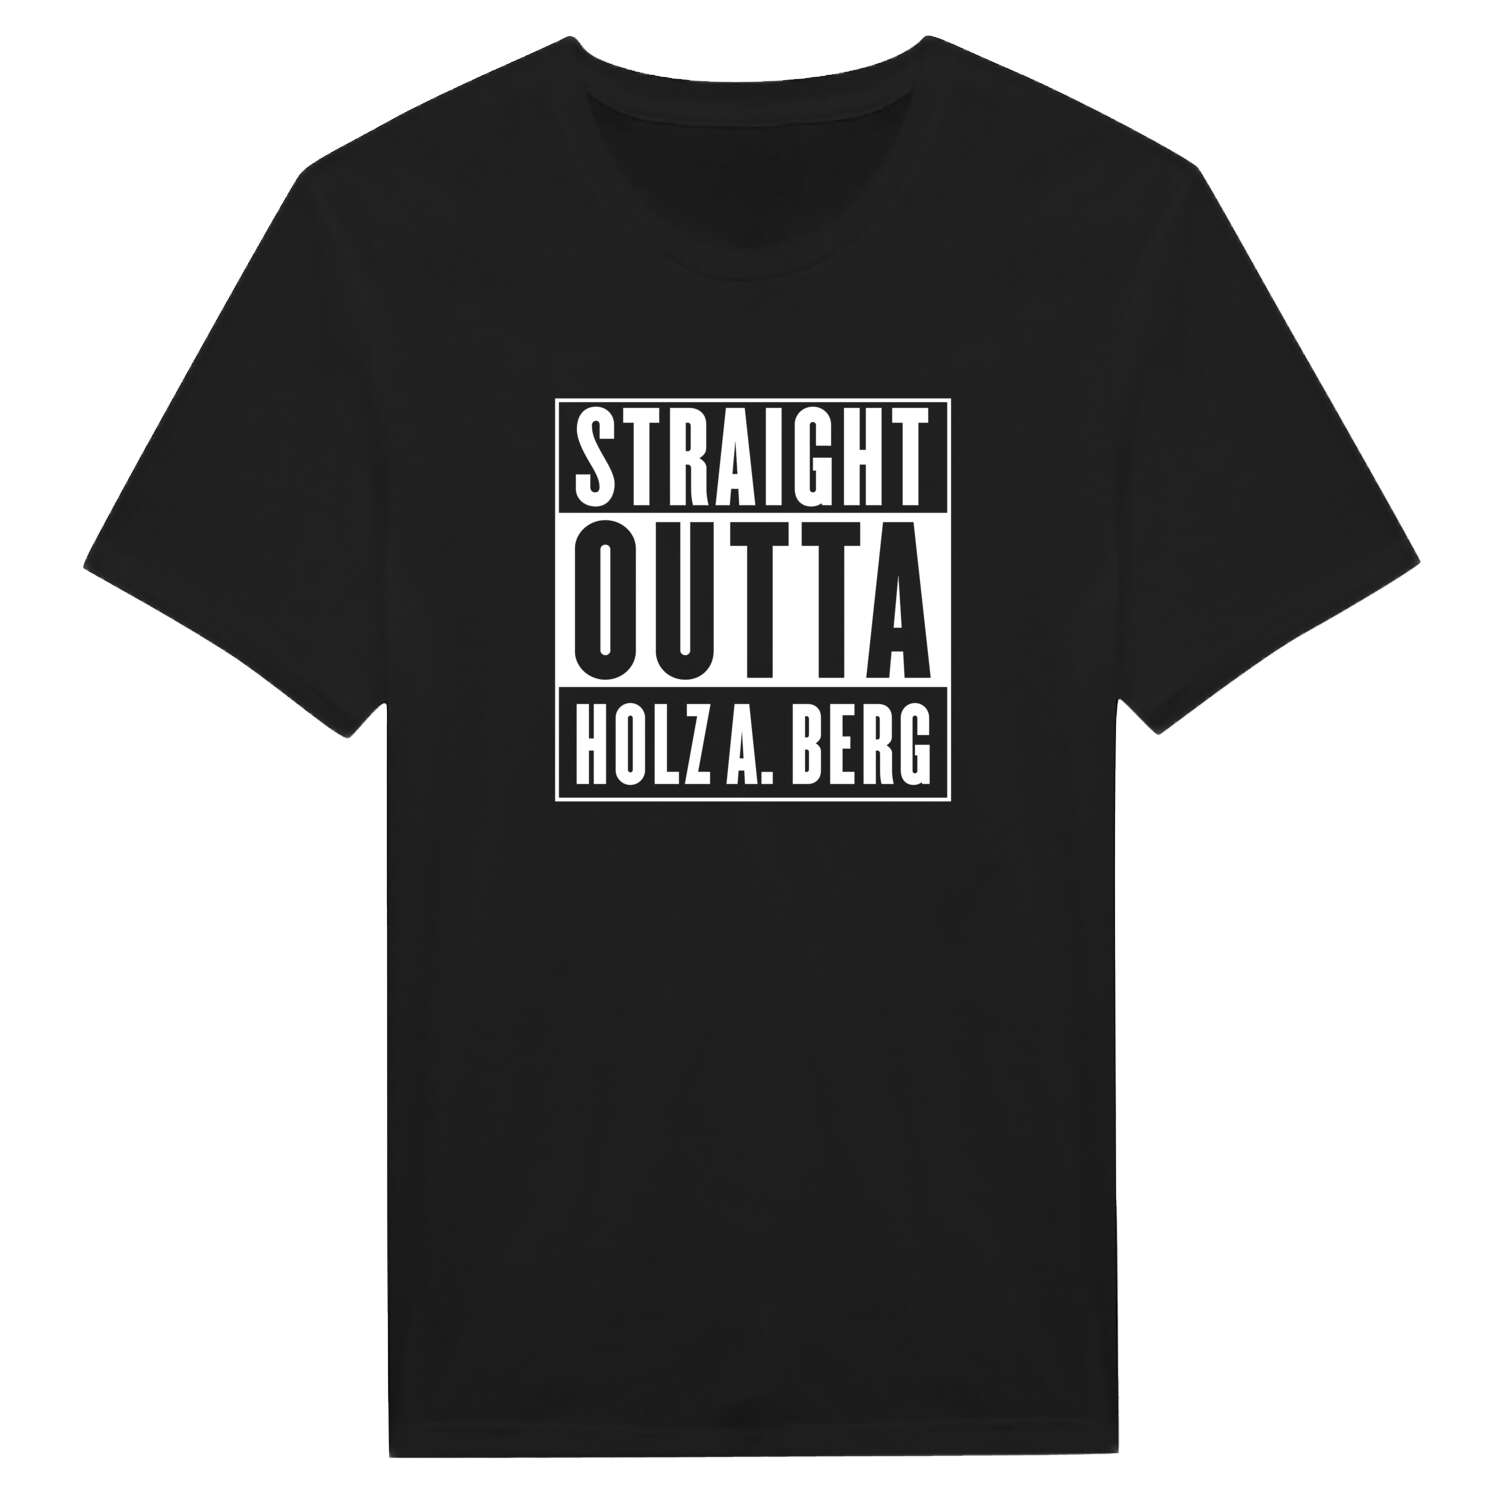 Holz a. Berg T-Shirt »Straight Outta«